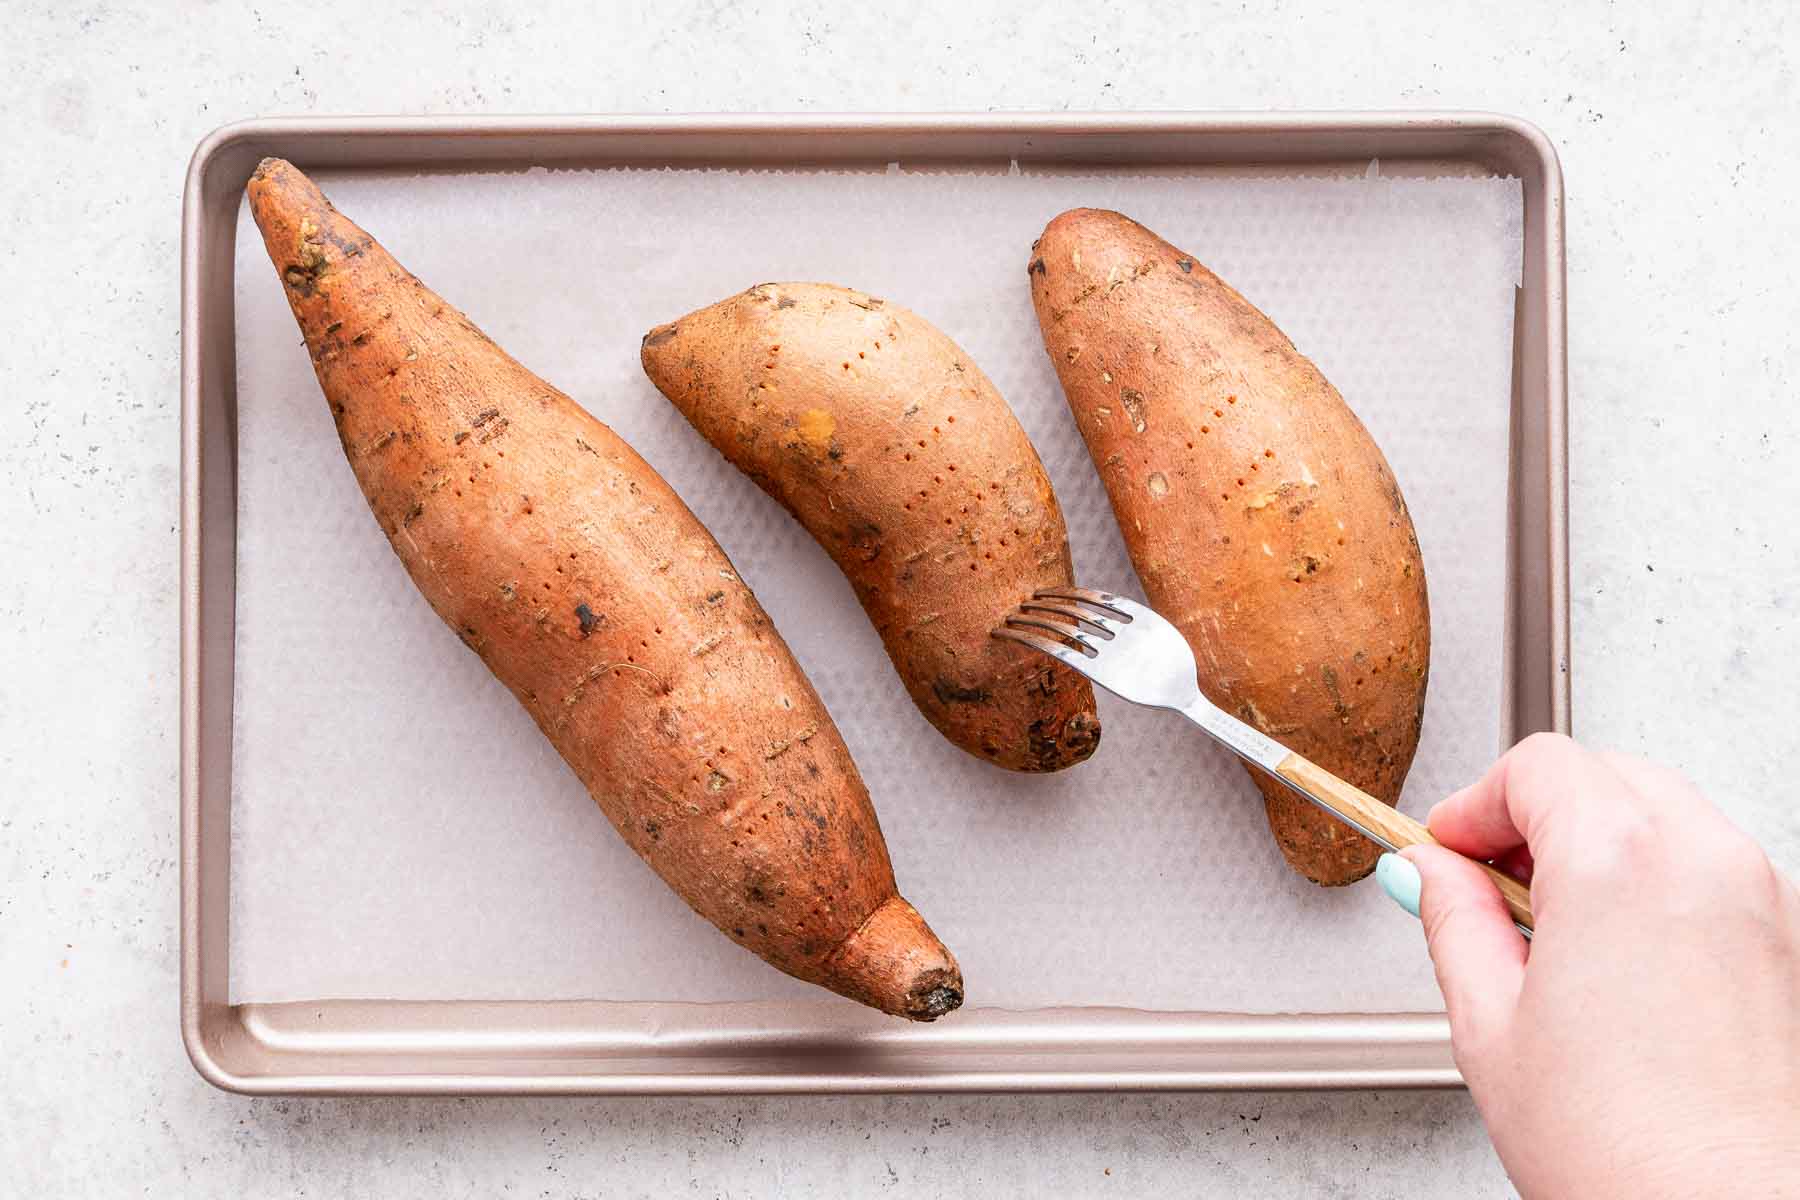 Hand pricking a fork into raw sweet potatoes on a baking dish.